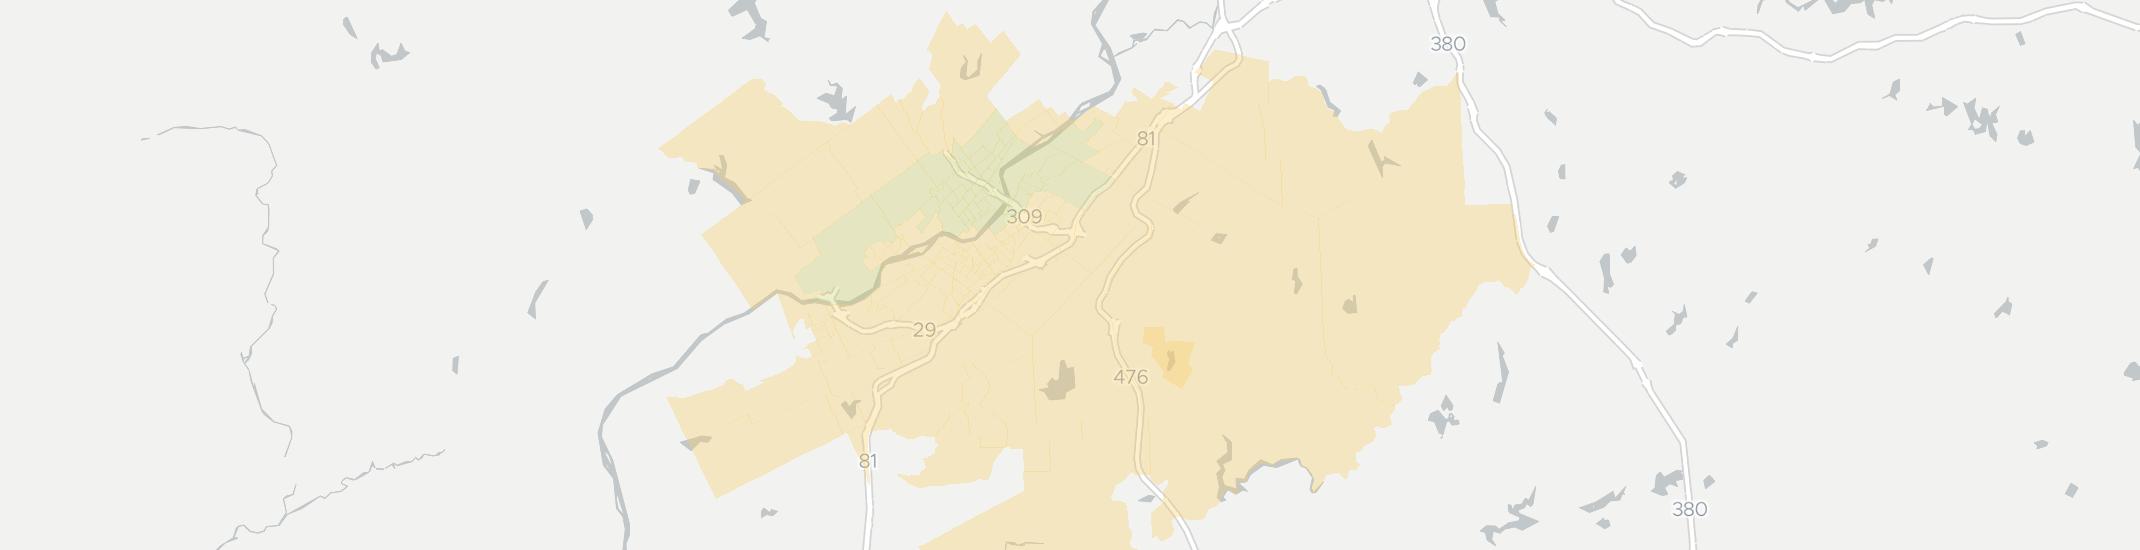 Wilkes Barre Internet Competition Map. Click for interactive map.